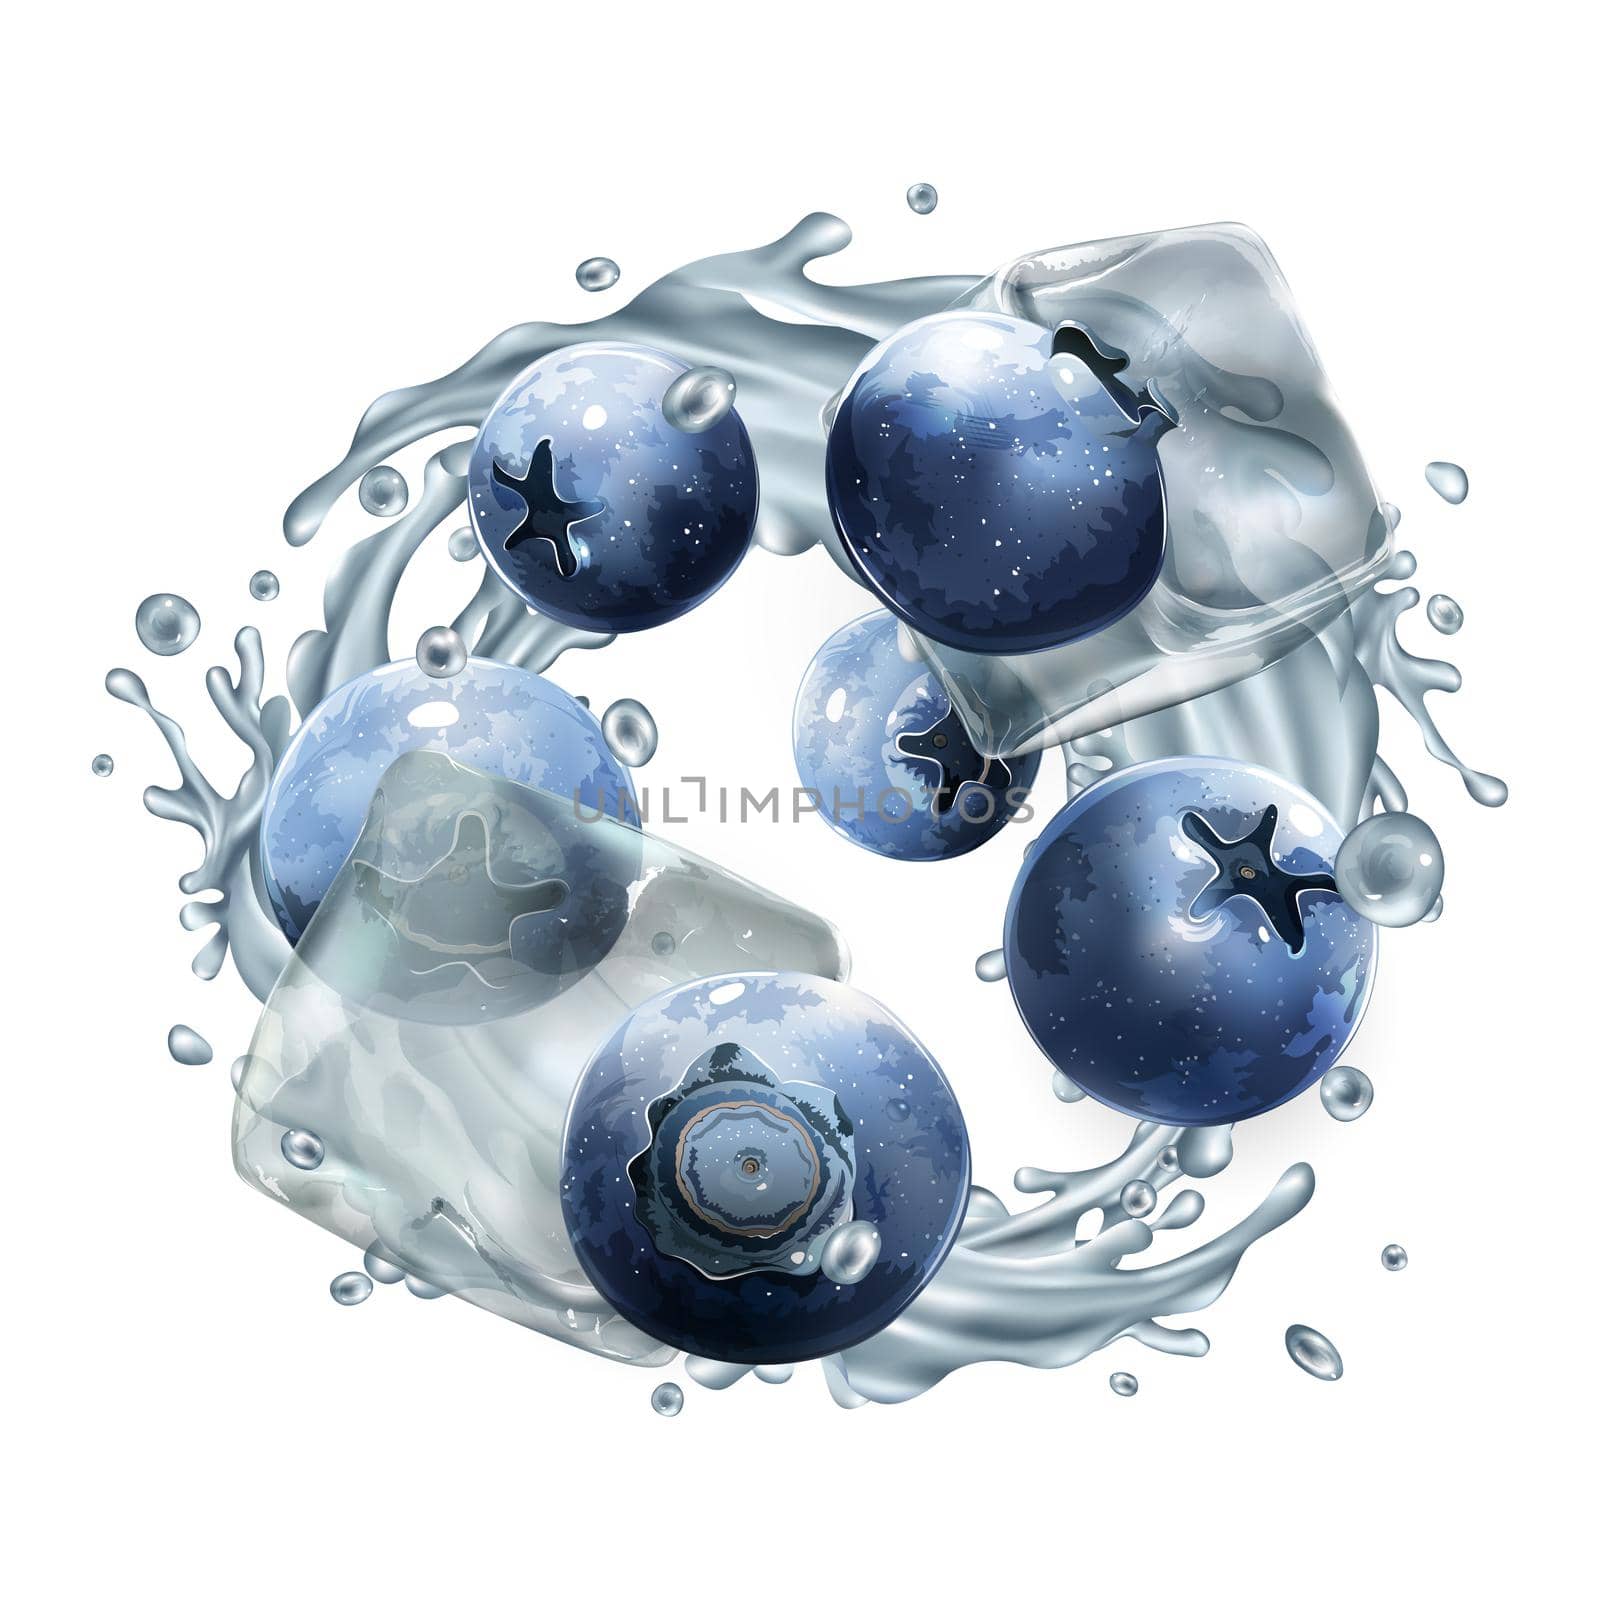 Blueberries and dynamic water splash with ice cubes by ConceptCafe